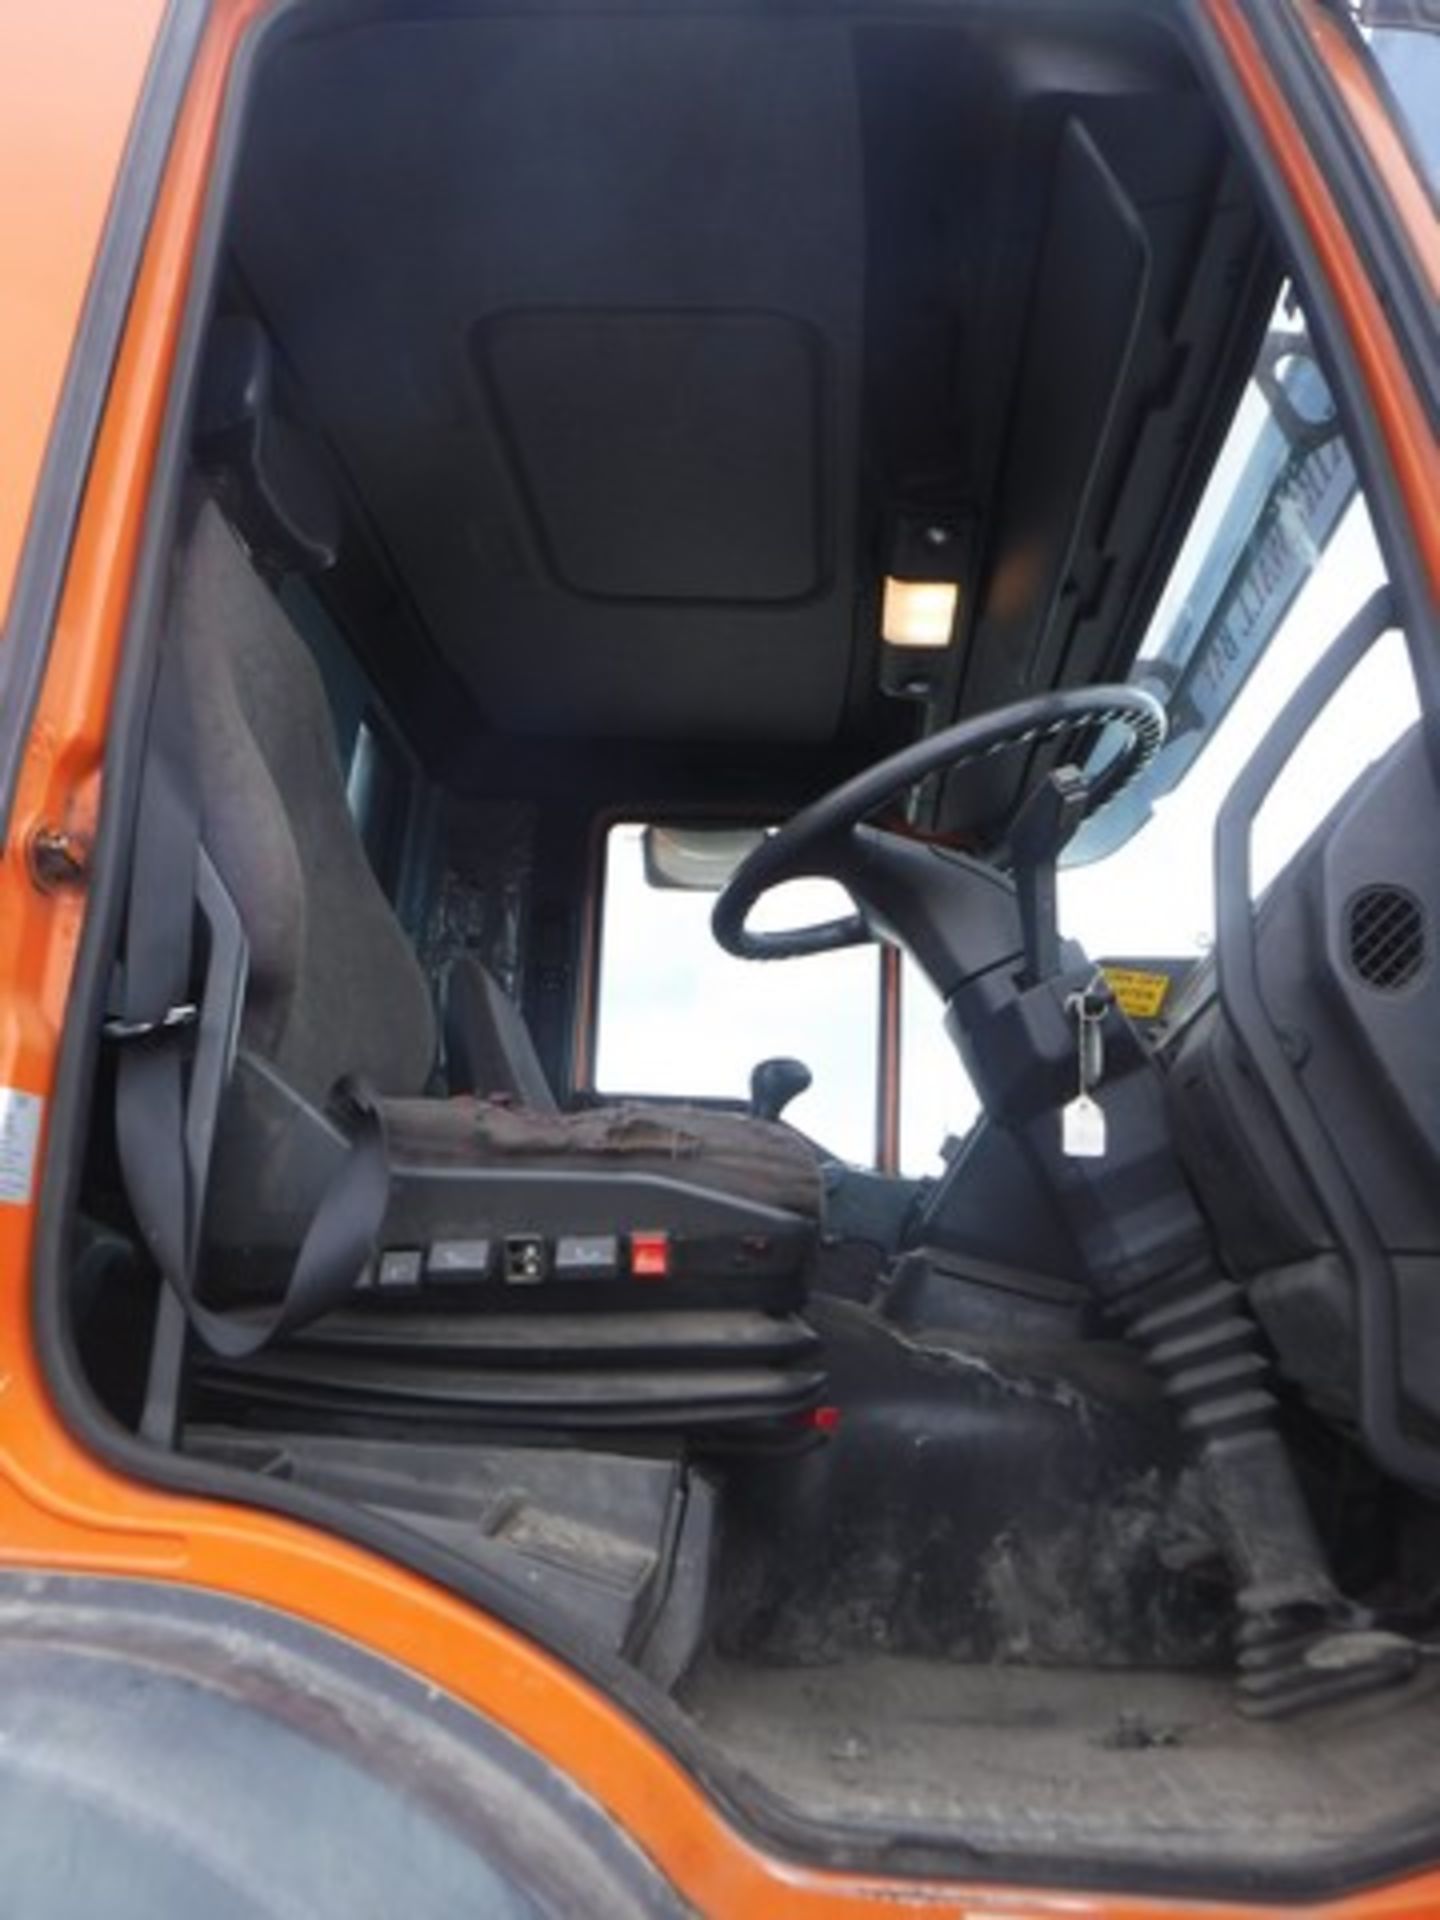 IVECO DAILY 50C15 3.5WB - 7790cc - Image 13 of 41